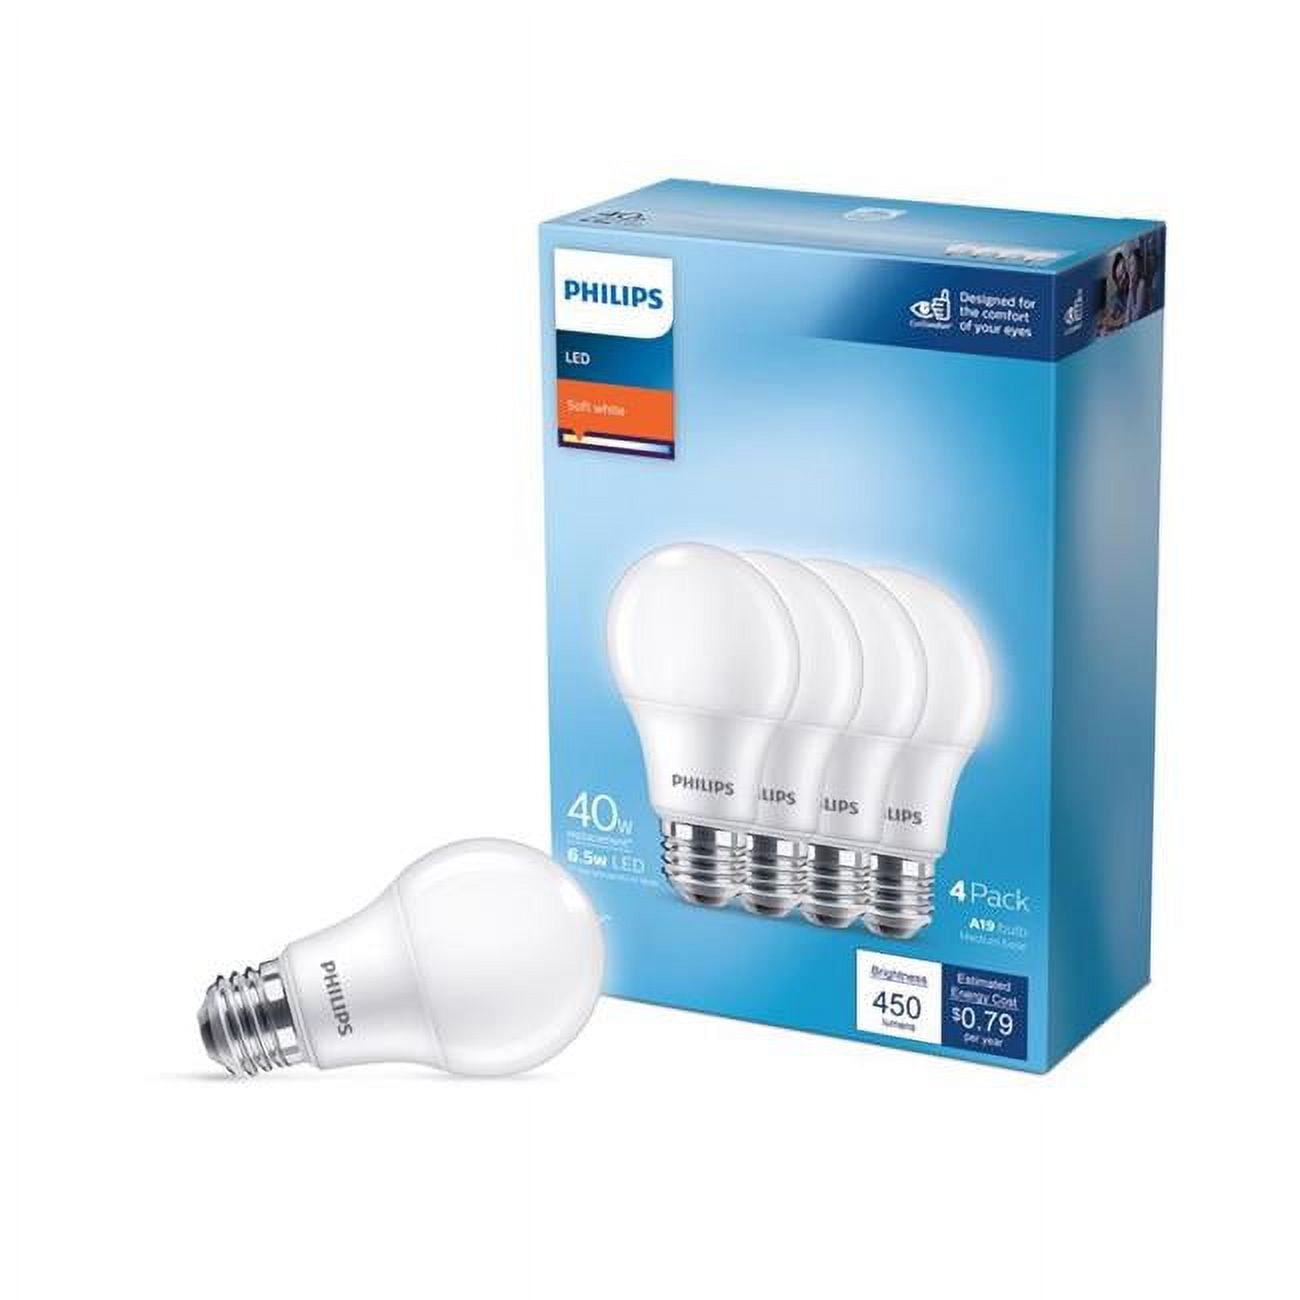 Philips HUE 60W Equiv. GU10 White Ambiance (2200-6500K) Dimmable